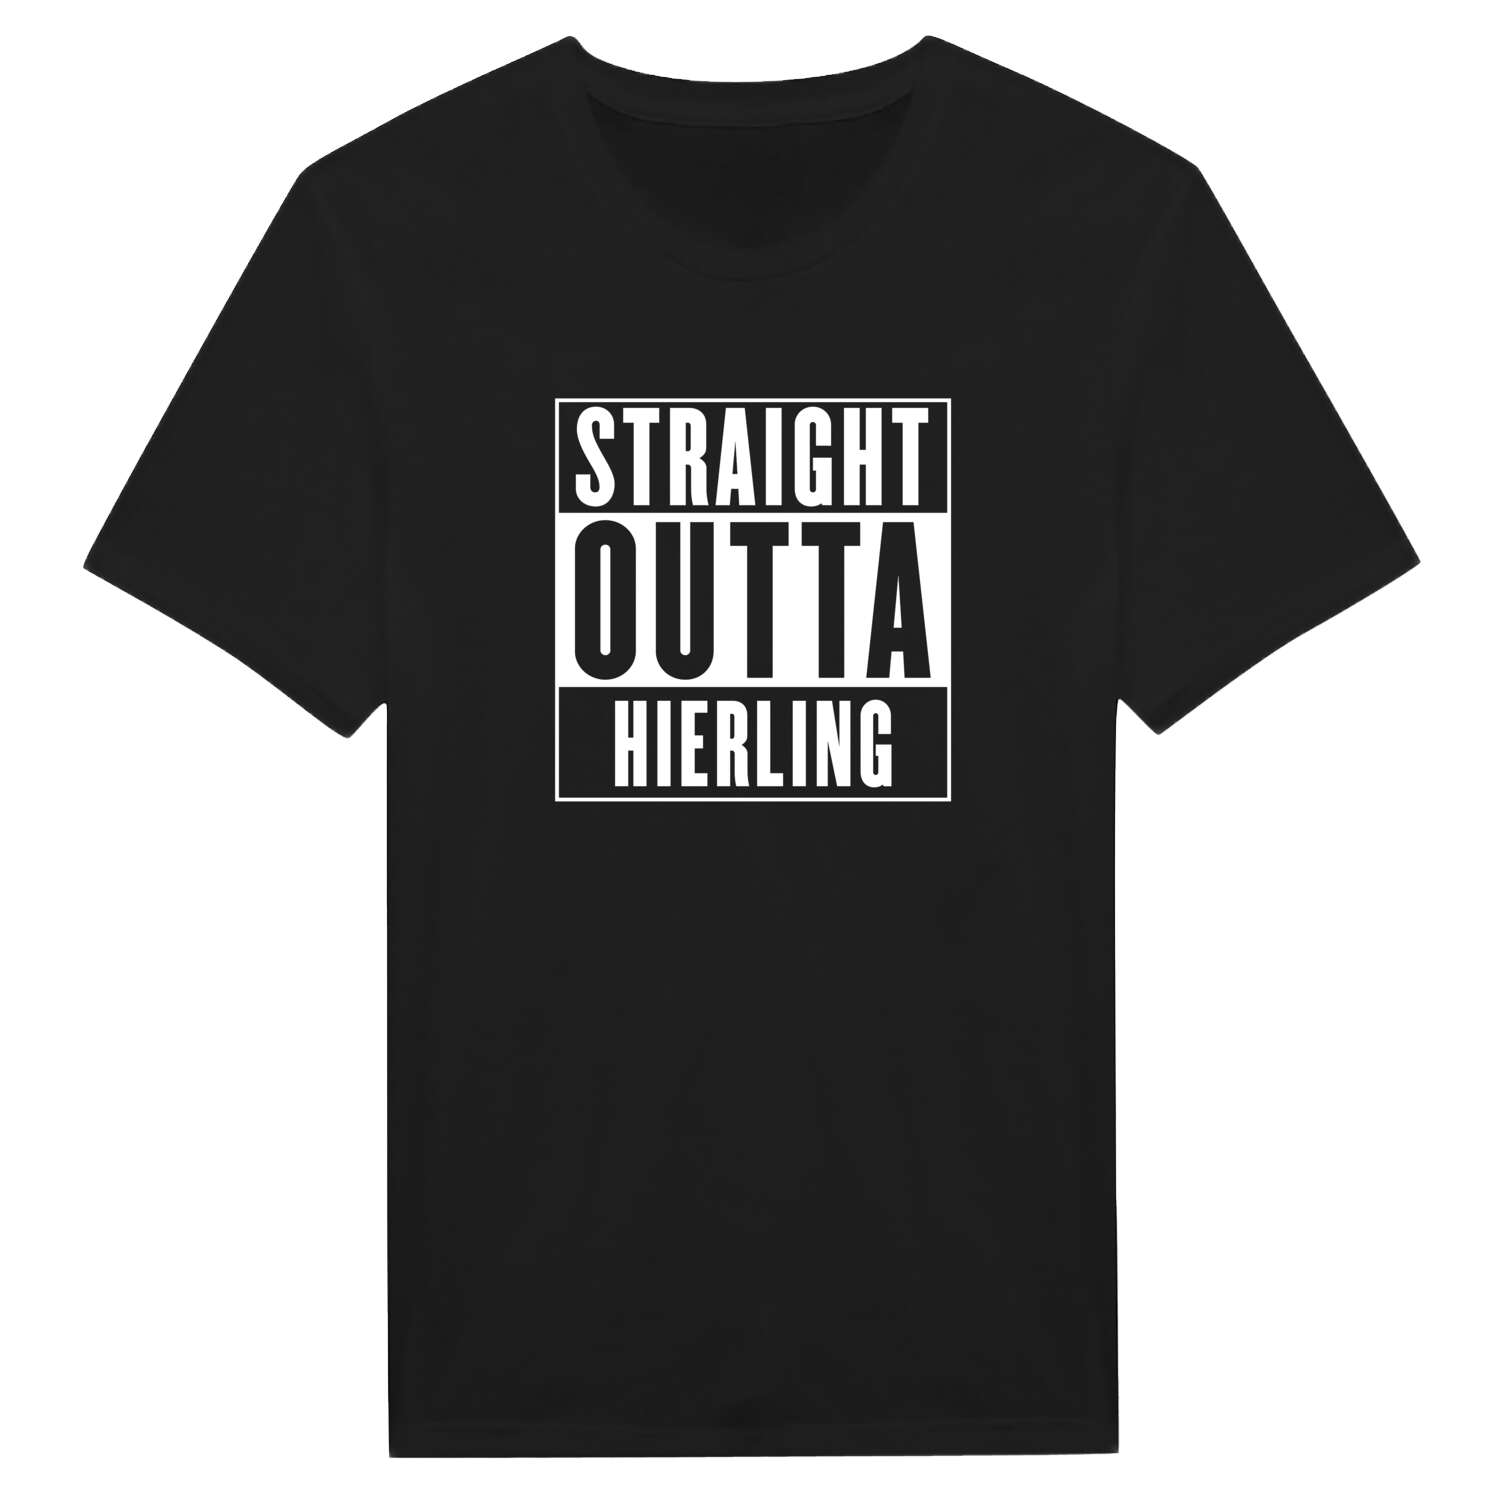 Hierling T-Shirt »Straight Outta«